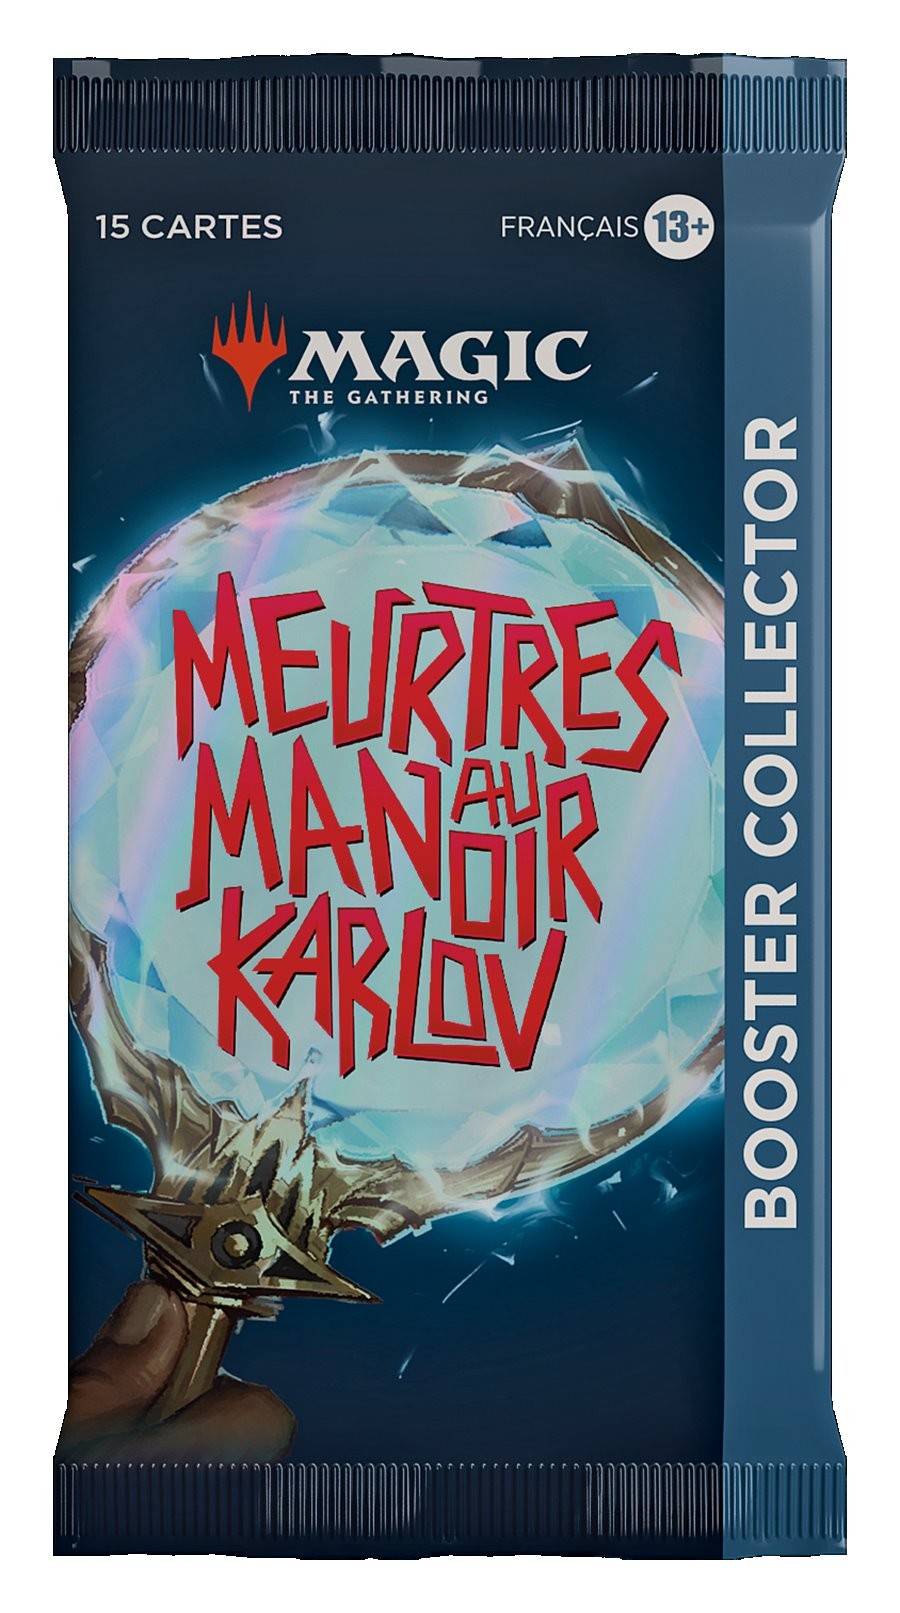 Murders at Karlov Manor Collector Booster Magic the Gathering mtg card